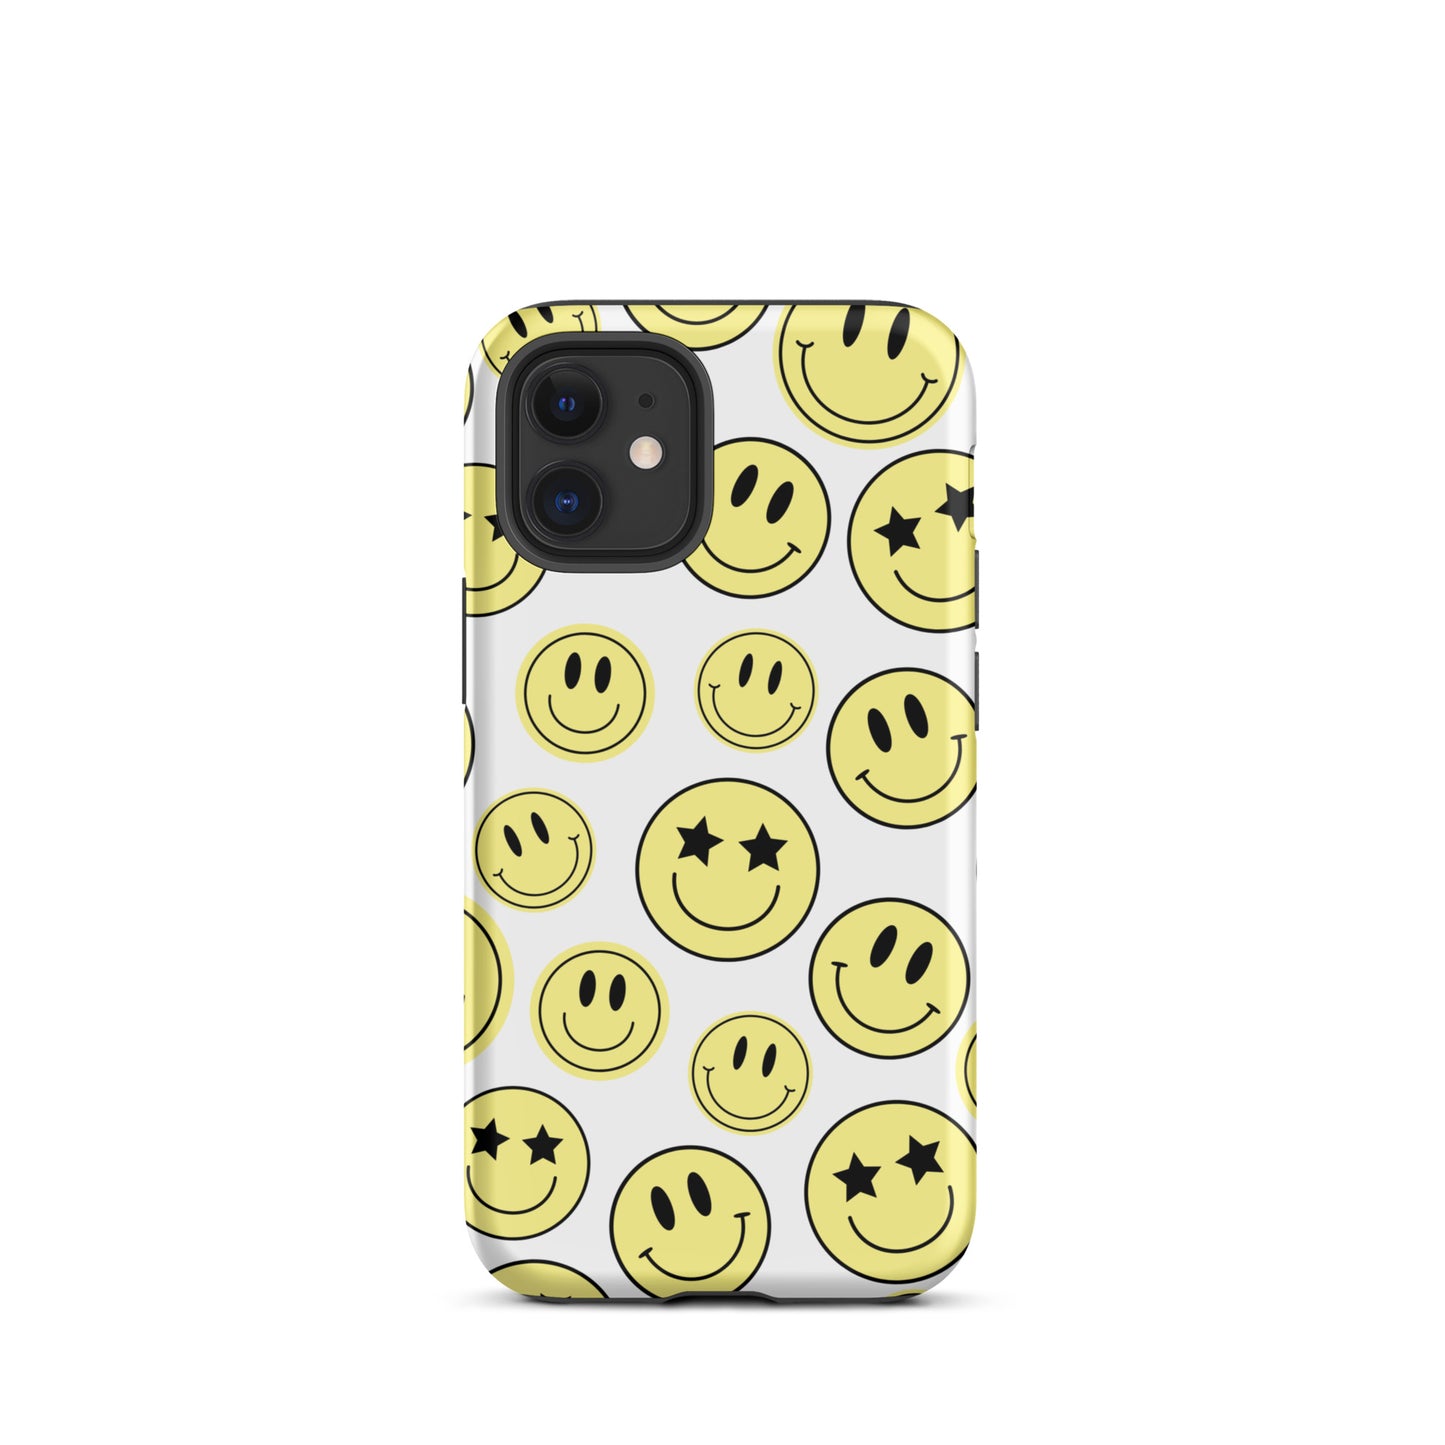 White Smiley Faces iPhone Case